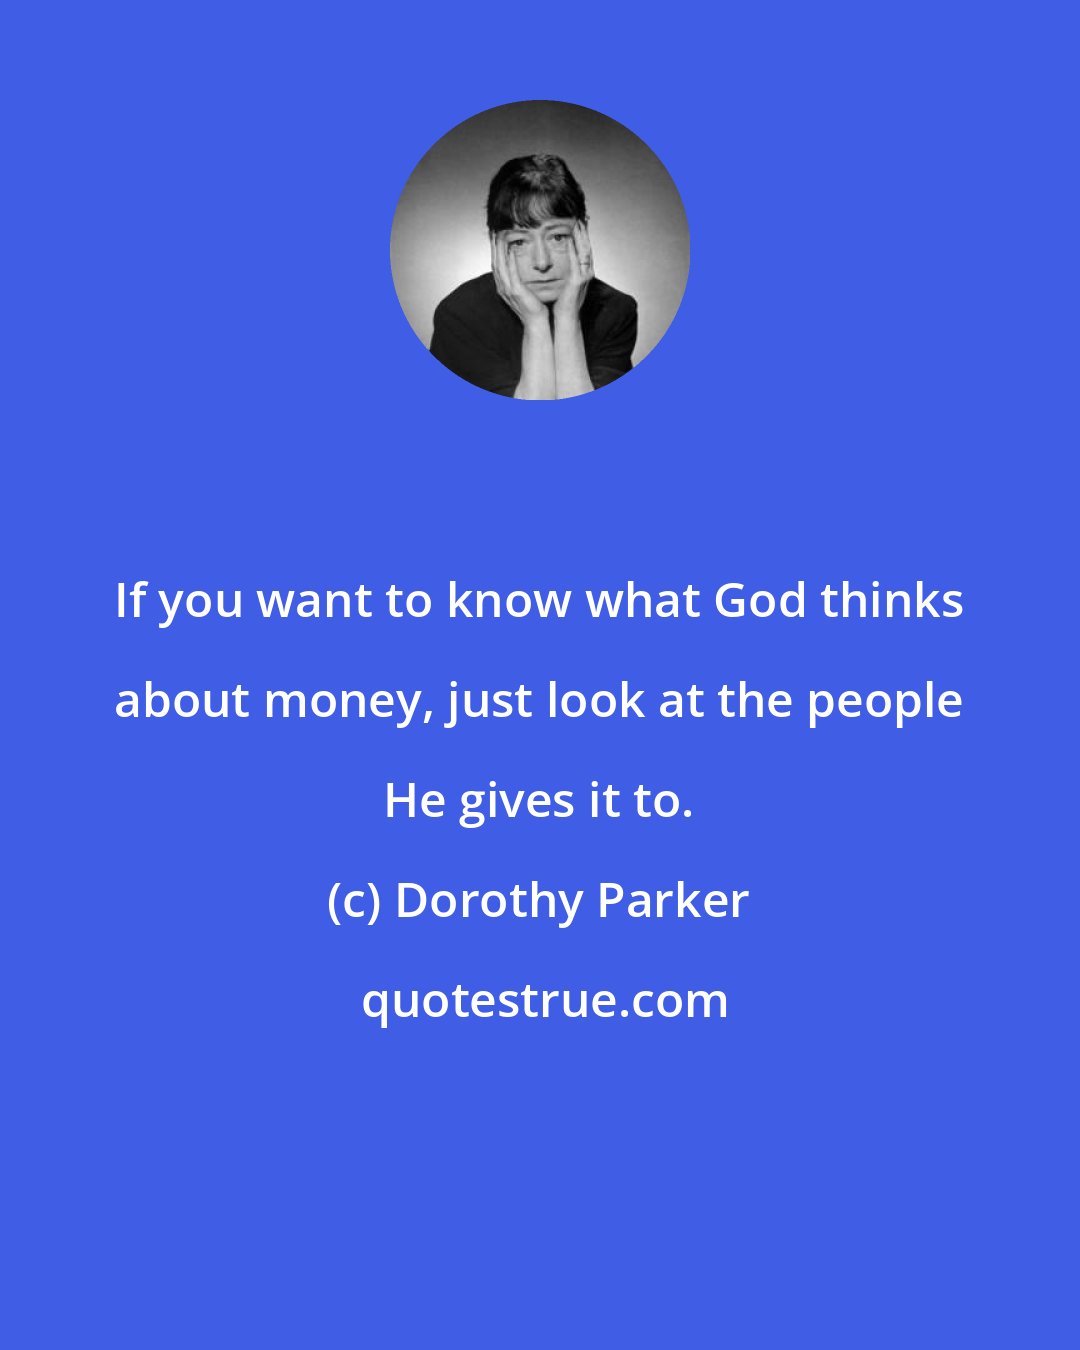 Dorothy Parker: If you want to know what God thinks about money, just look at the people He gives it to.